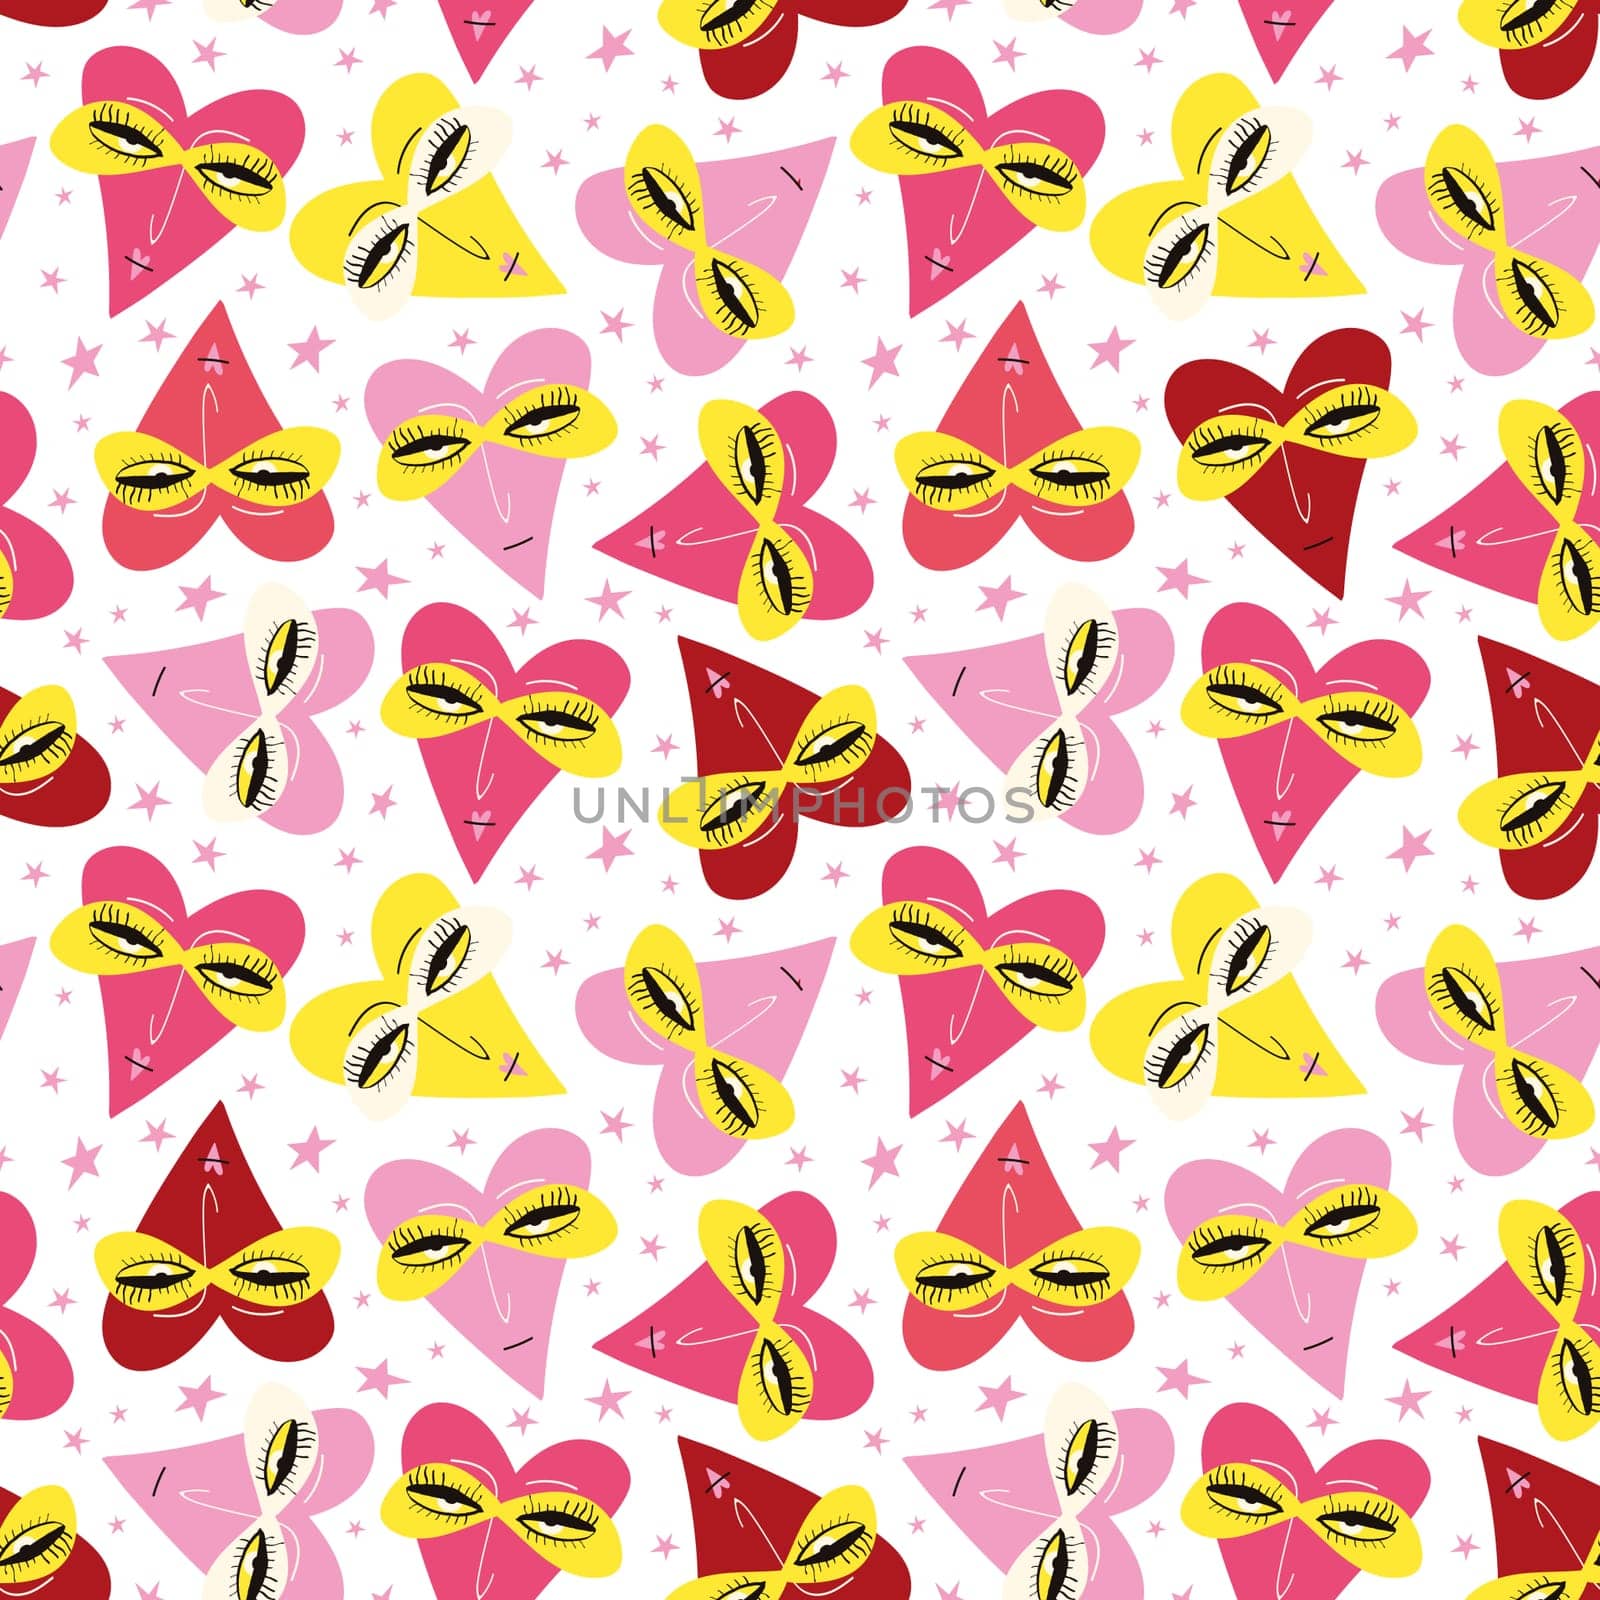 pink Valentines Day pattern with ugly funky hearts. Groovy cute love characters by Dustick